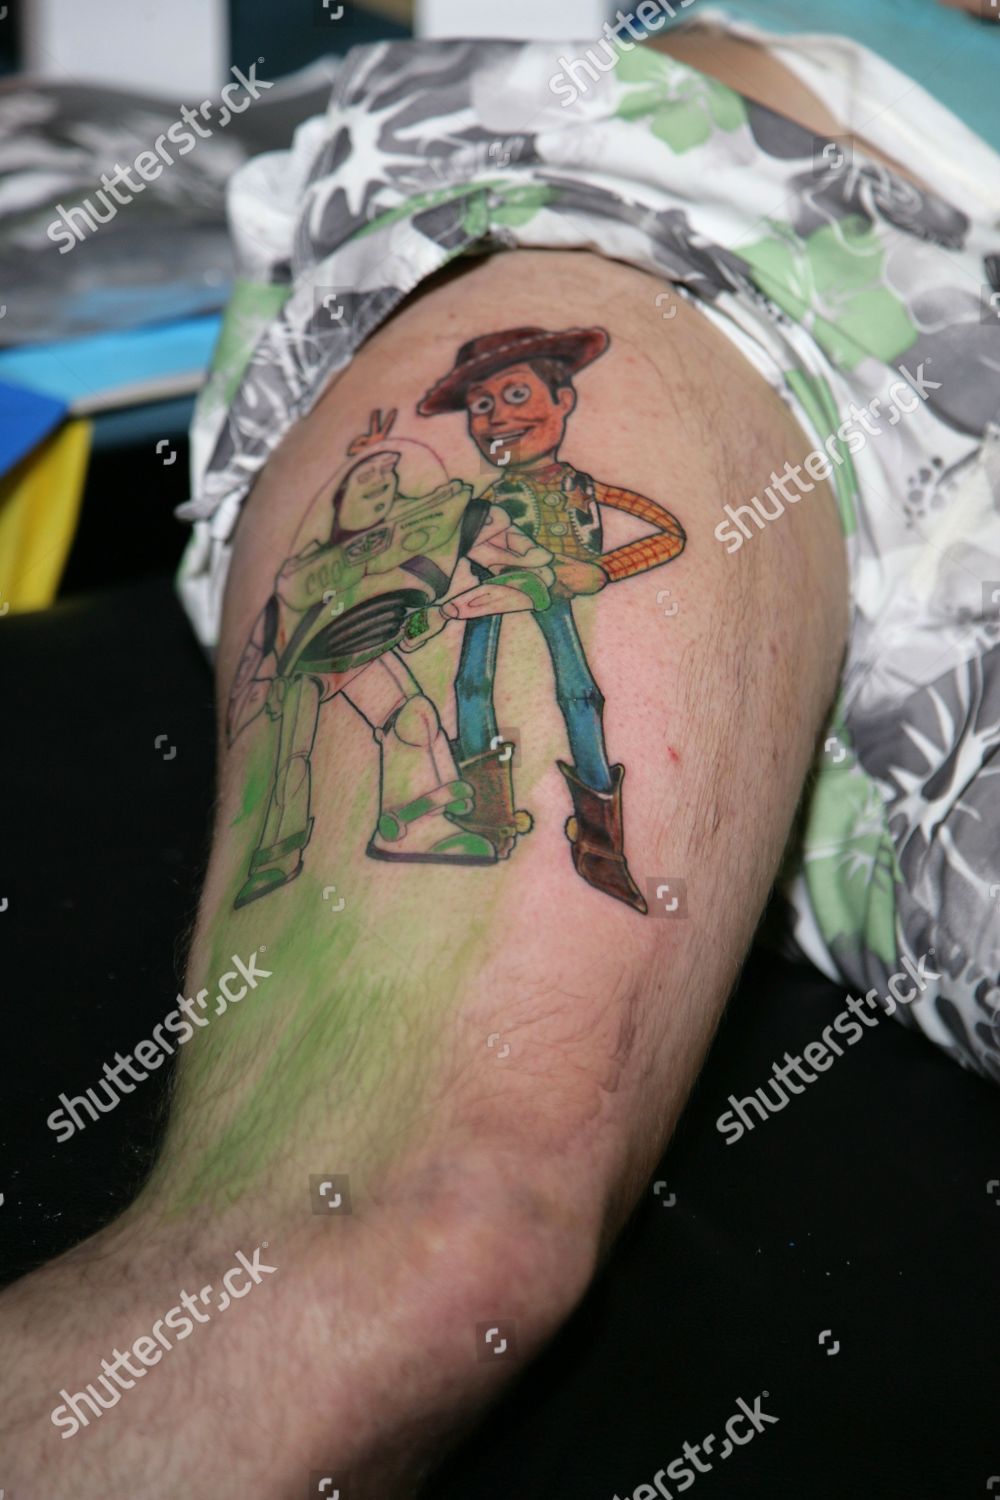 55 Toy Story Tattoos That Would Make Pixar Proud  TattooBlend